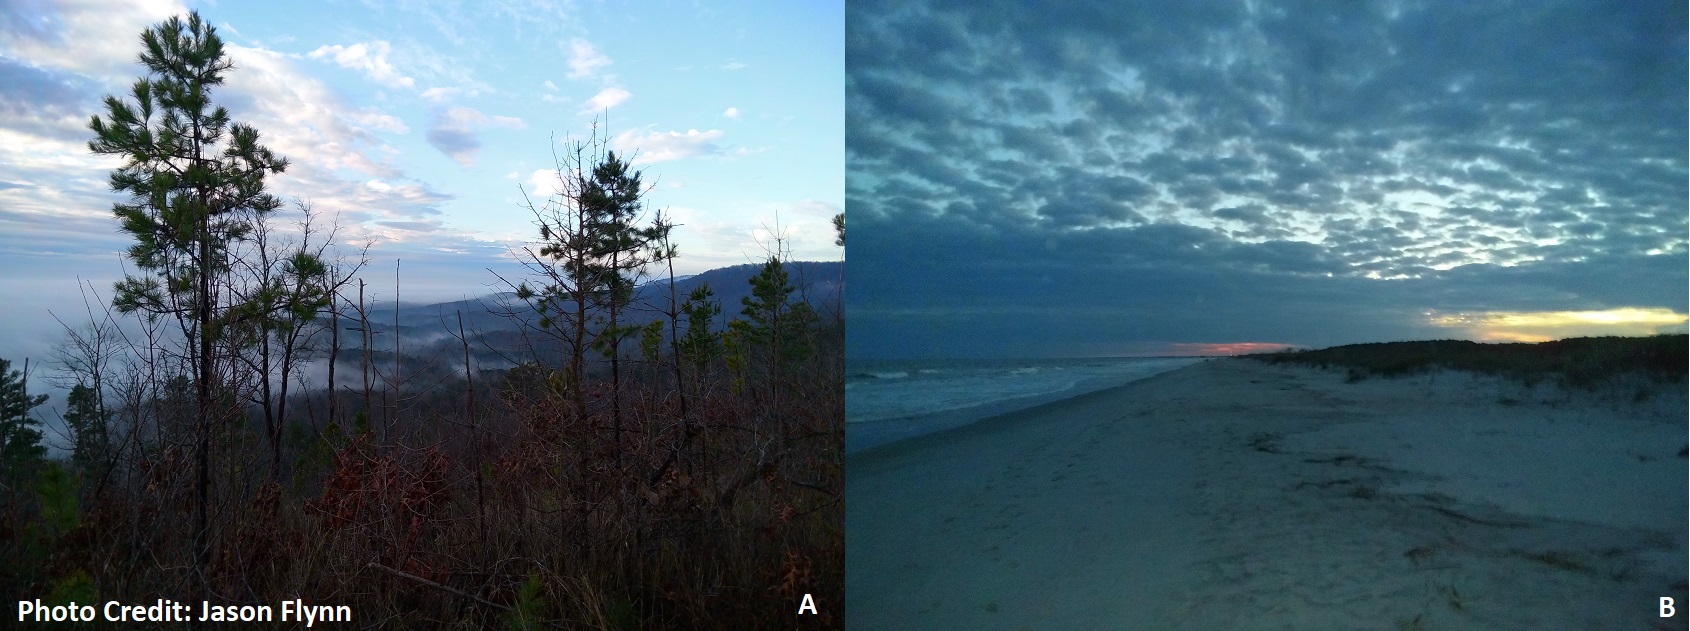 A)The clouds breaking - a “smoky” morning sunrise atop Buzzard’s Roost Mountain in the geographic Blue Ridge area. B)Sunset on the Coastal Zone beach line at Huntington Beach State Park. The natural connections and cycles continue…